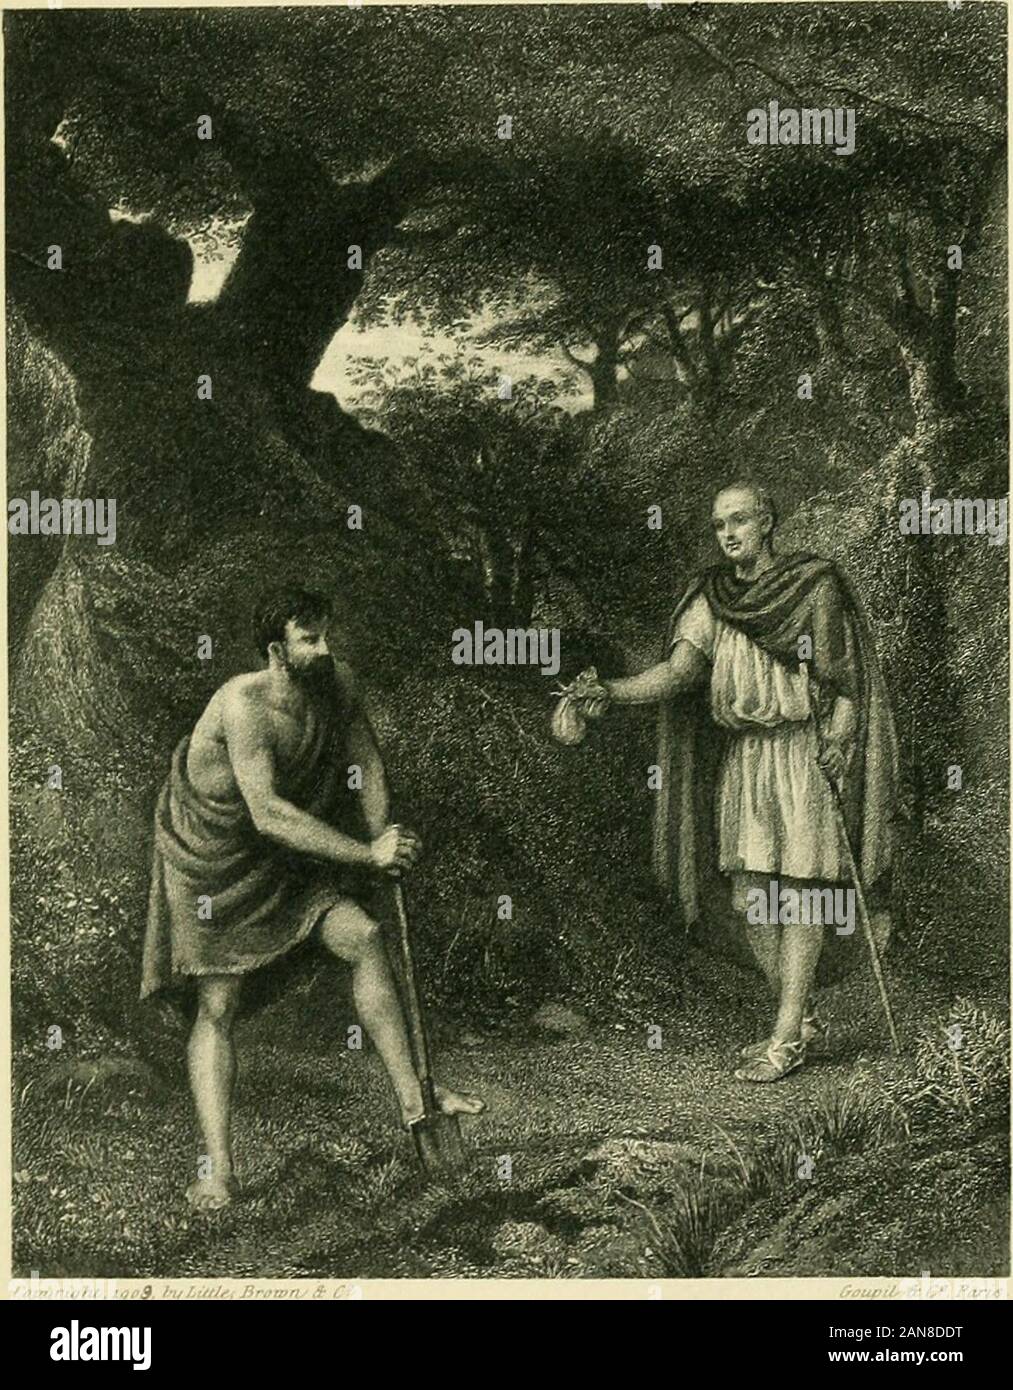 Gallery of Shakespeare illustrations, from celebrated works of art . JJu f/tu-riiissiany 0/^ Ooi^i/^ 3t Cf, Jayis. TIMON AND FLAVIUS From an engraving by Chas. Cousen, after the painting by H. Wallis TiMON OF Athens, Act IV, Sc. iii. CAESAR AND CALPURNIA From an engraving by J. Bauer, after the painting byFrank Dicksee JuMus Caesar, Act 11, Sc. ii •rjjfli; .•lOiir.H .. (t ^ii ytfAn( iiiiJ.) I ,t. Stock Photo